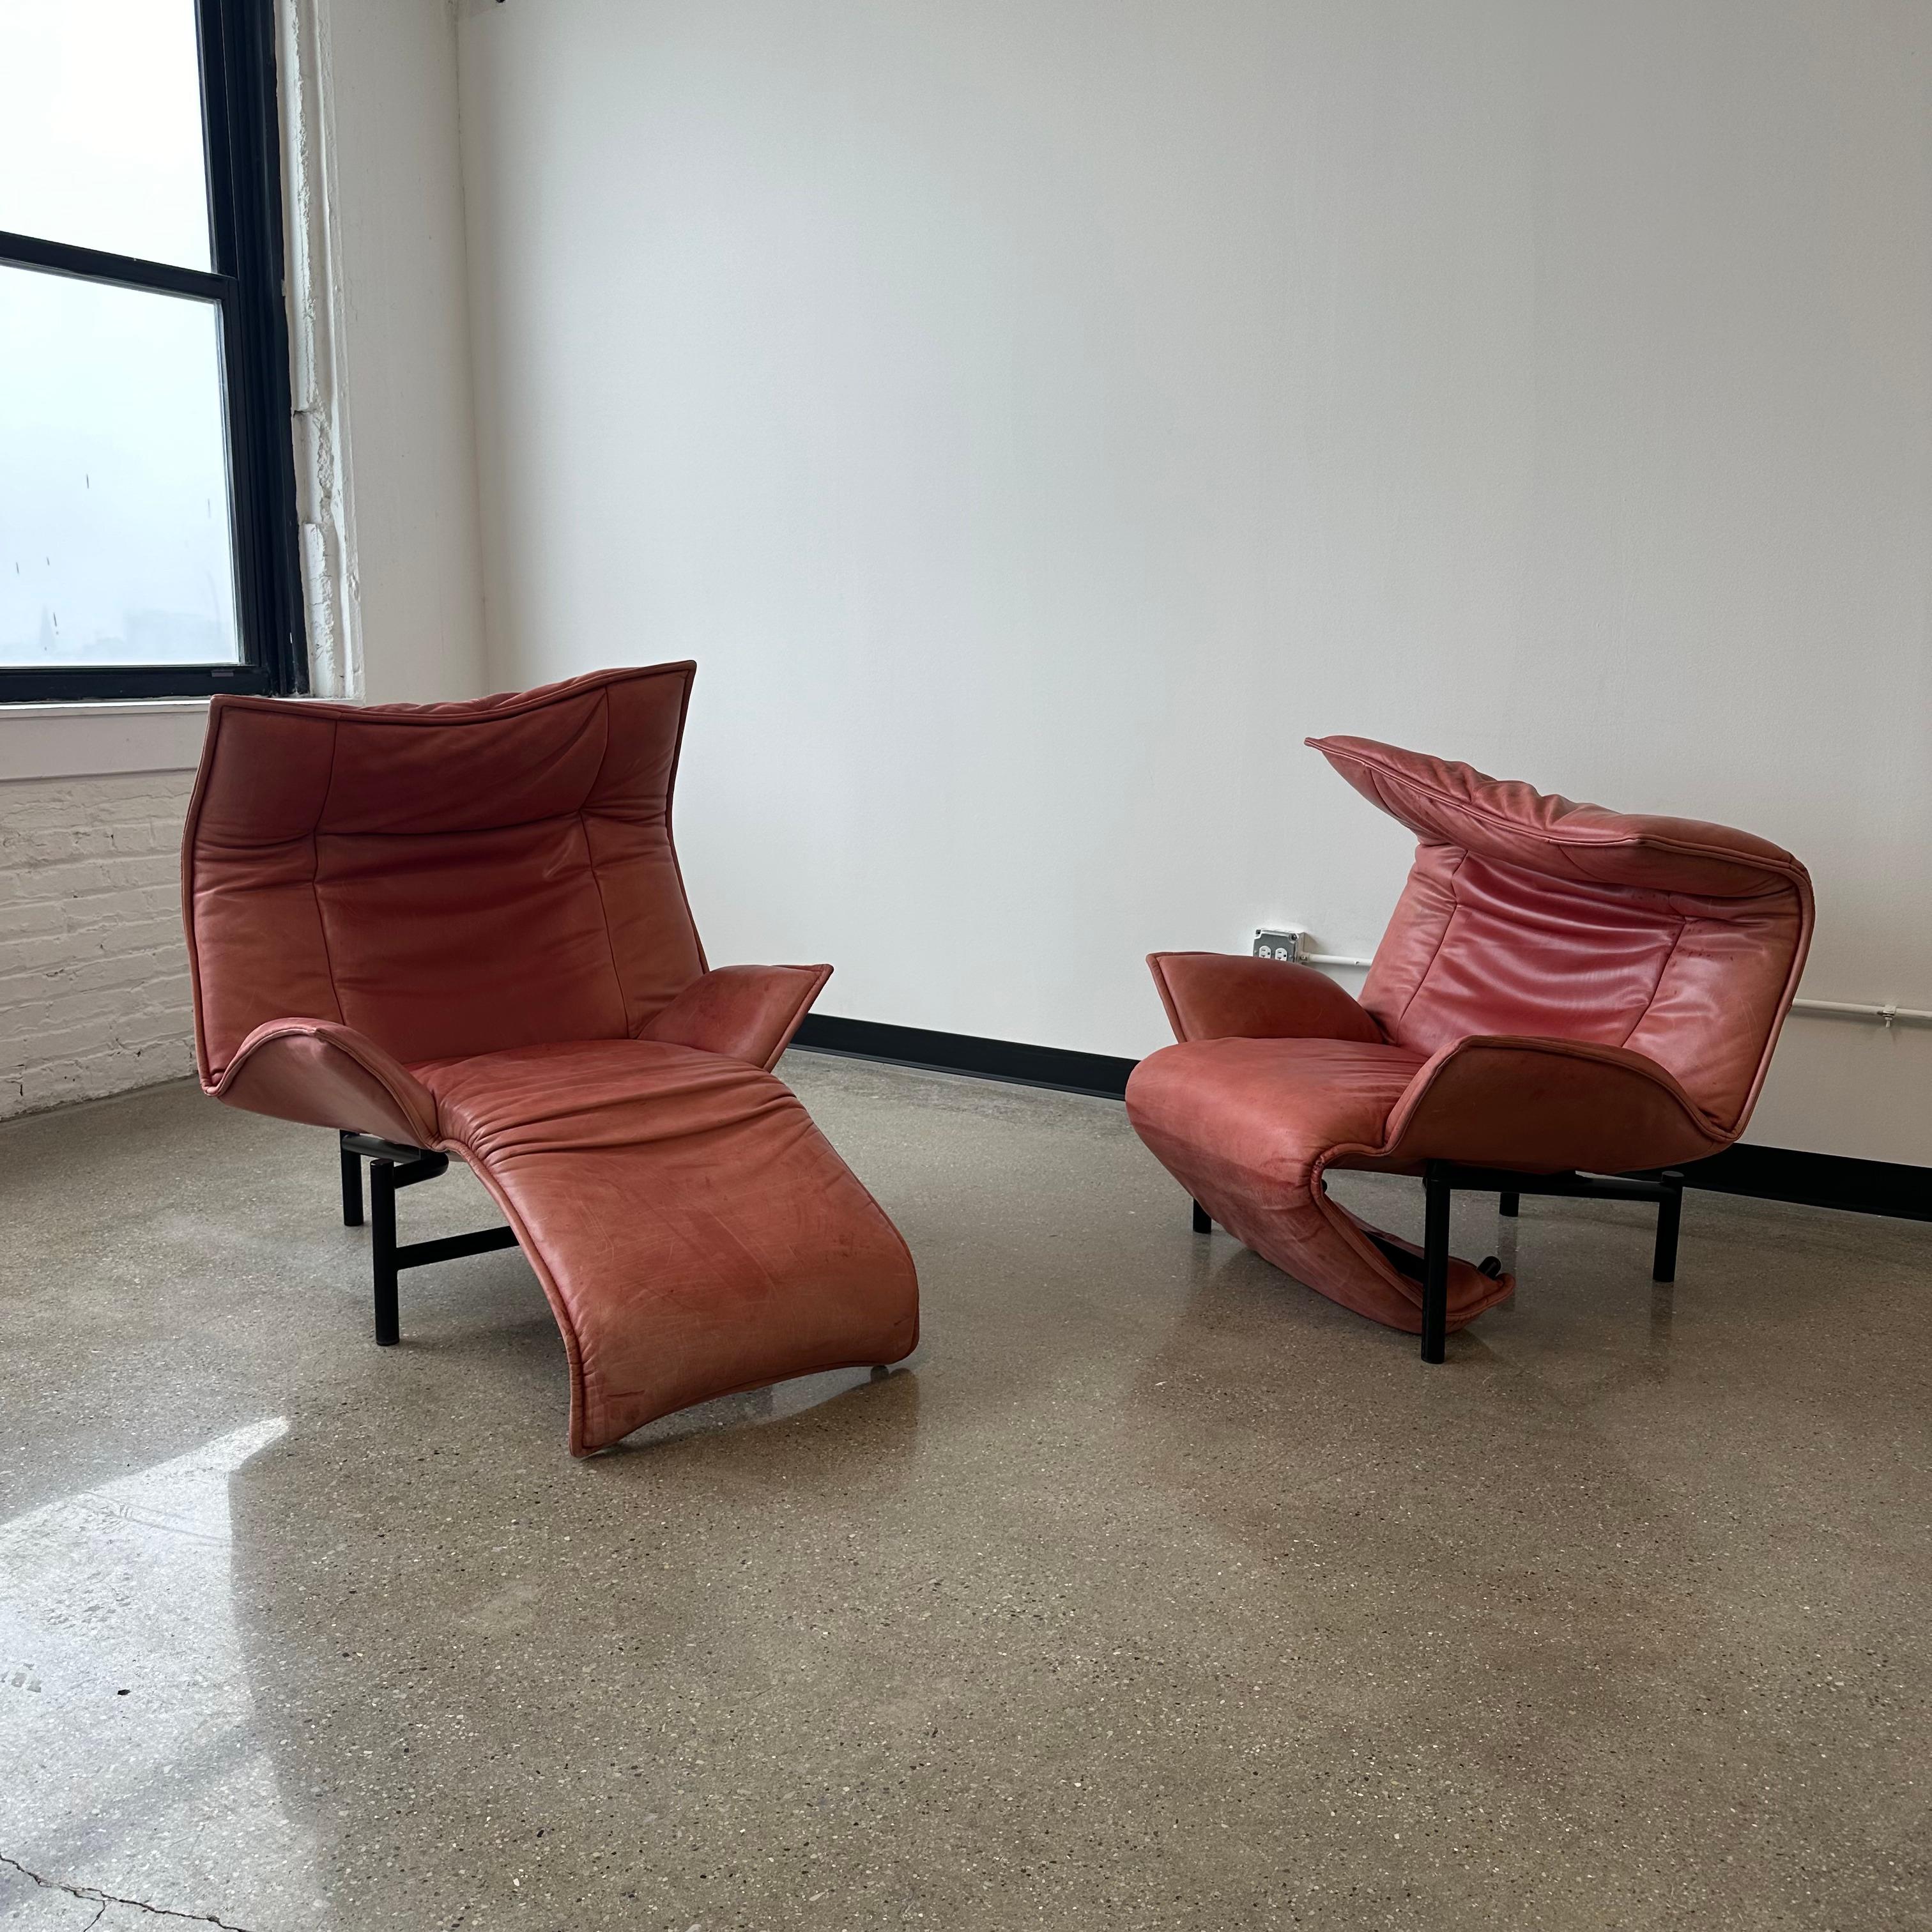 c. 1980s for Cassina, heavy patina - restoration available for a fee but we like them how they are